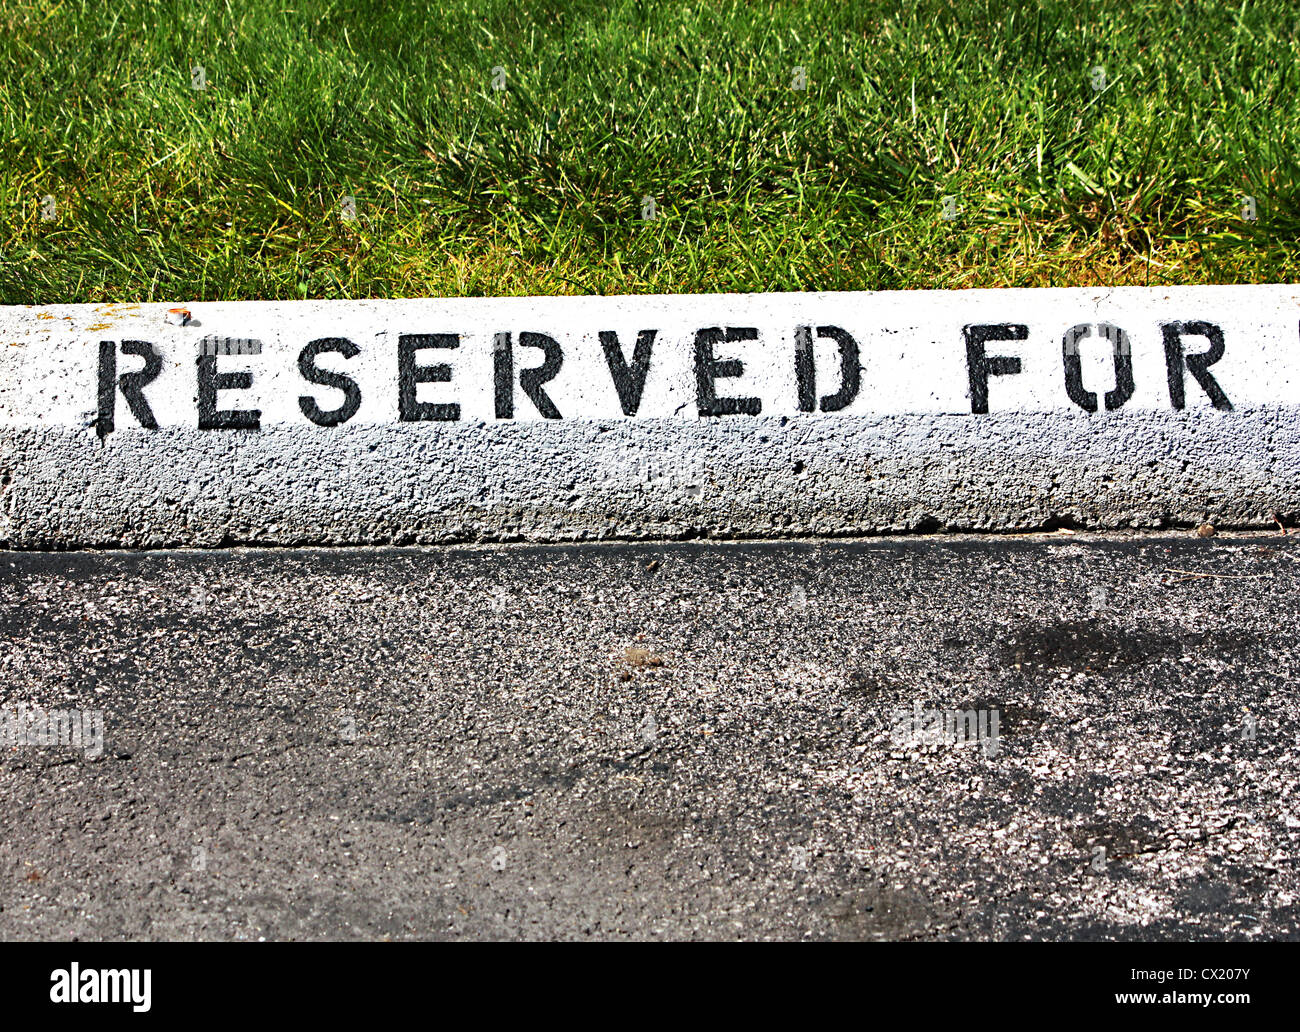 Reserved For sign Stock Photo